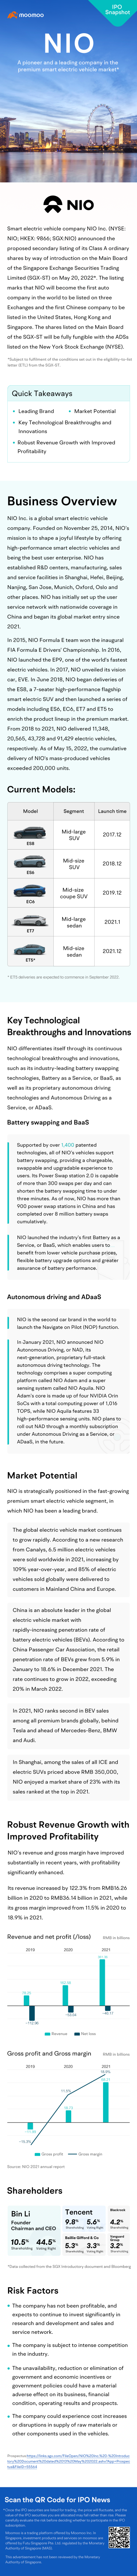 Nio listing on SGX in one page